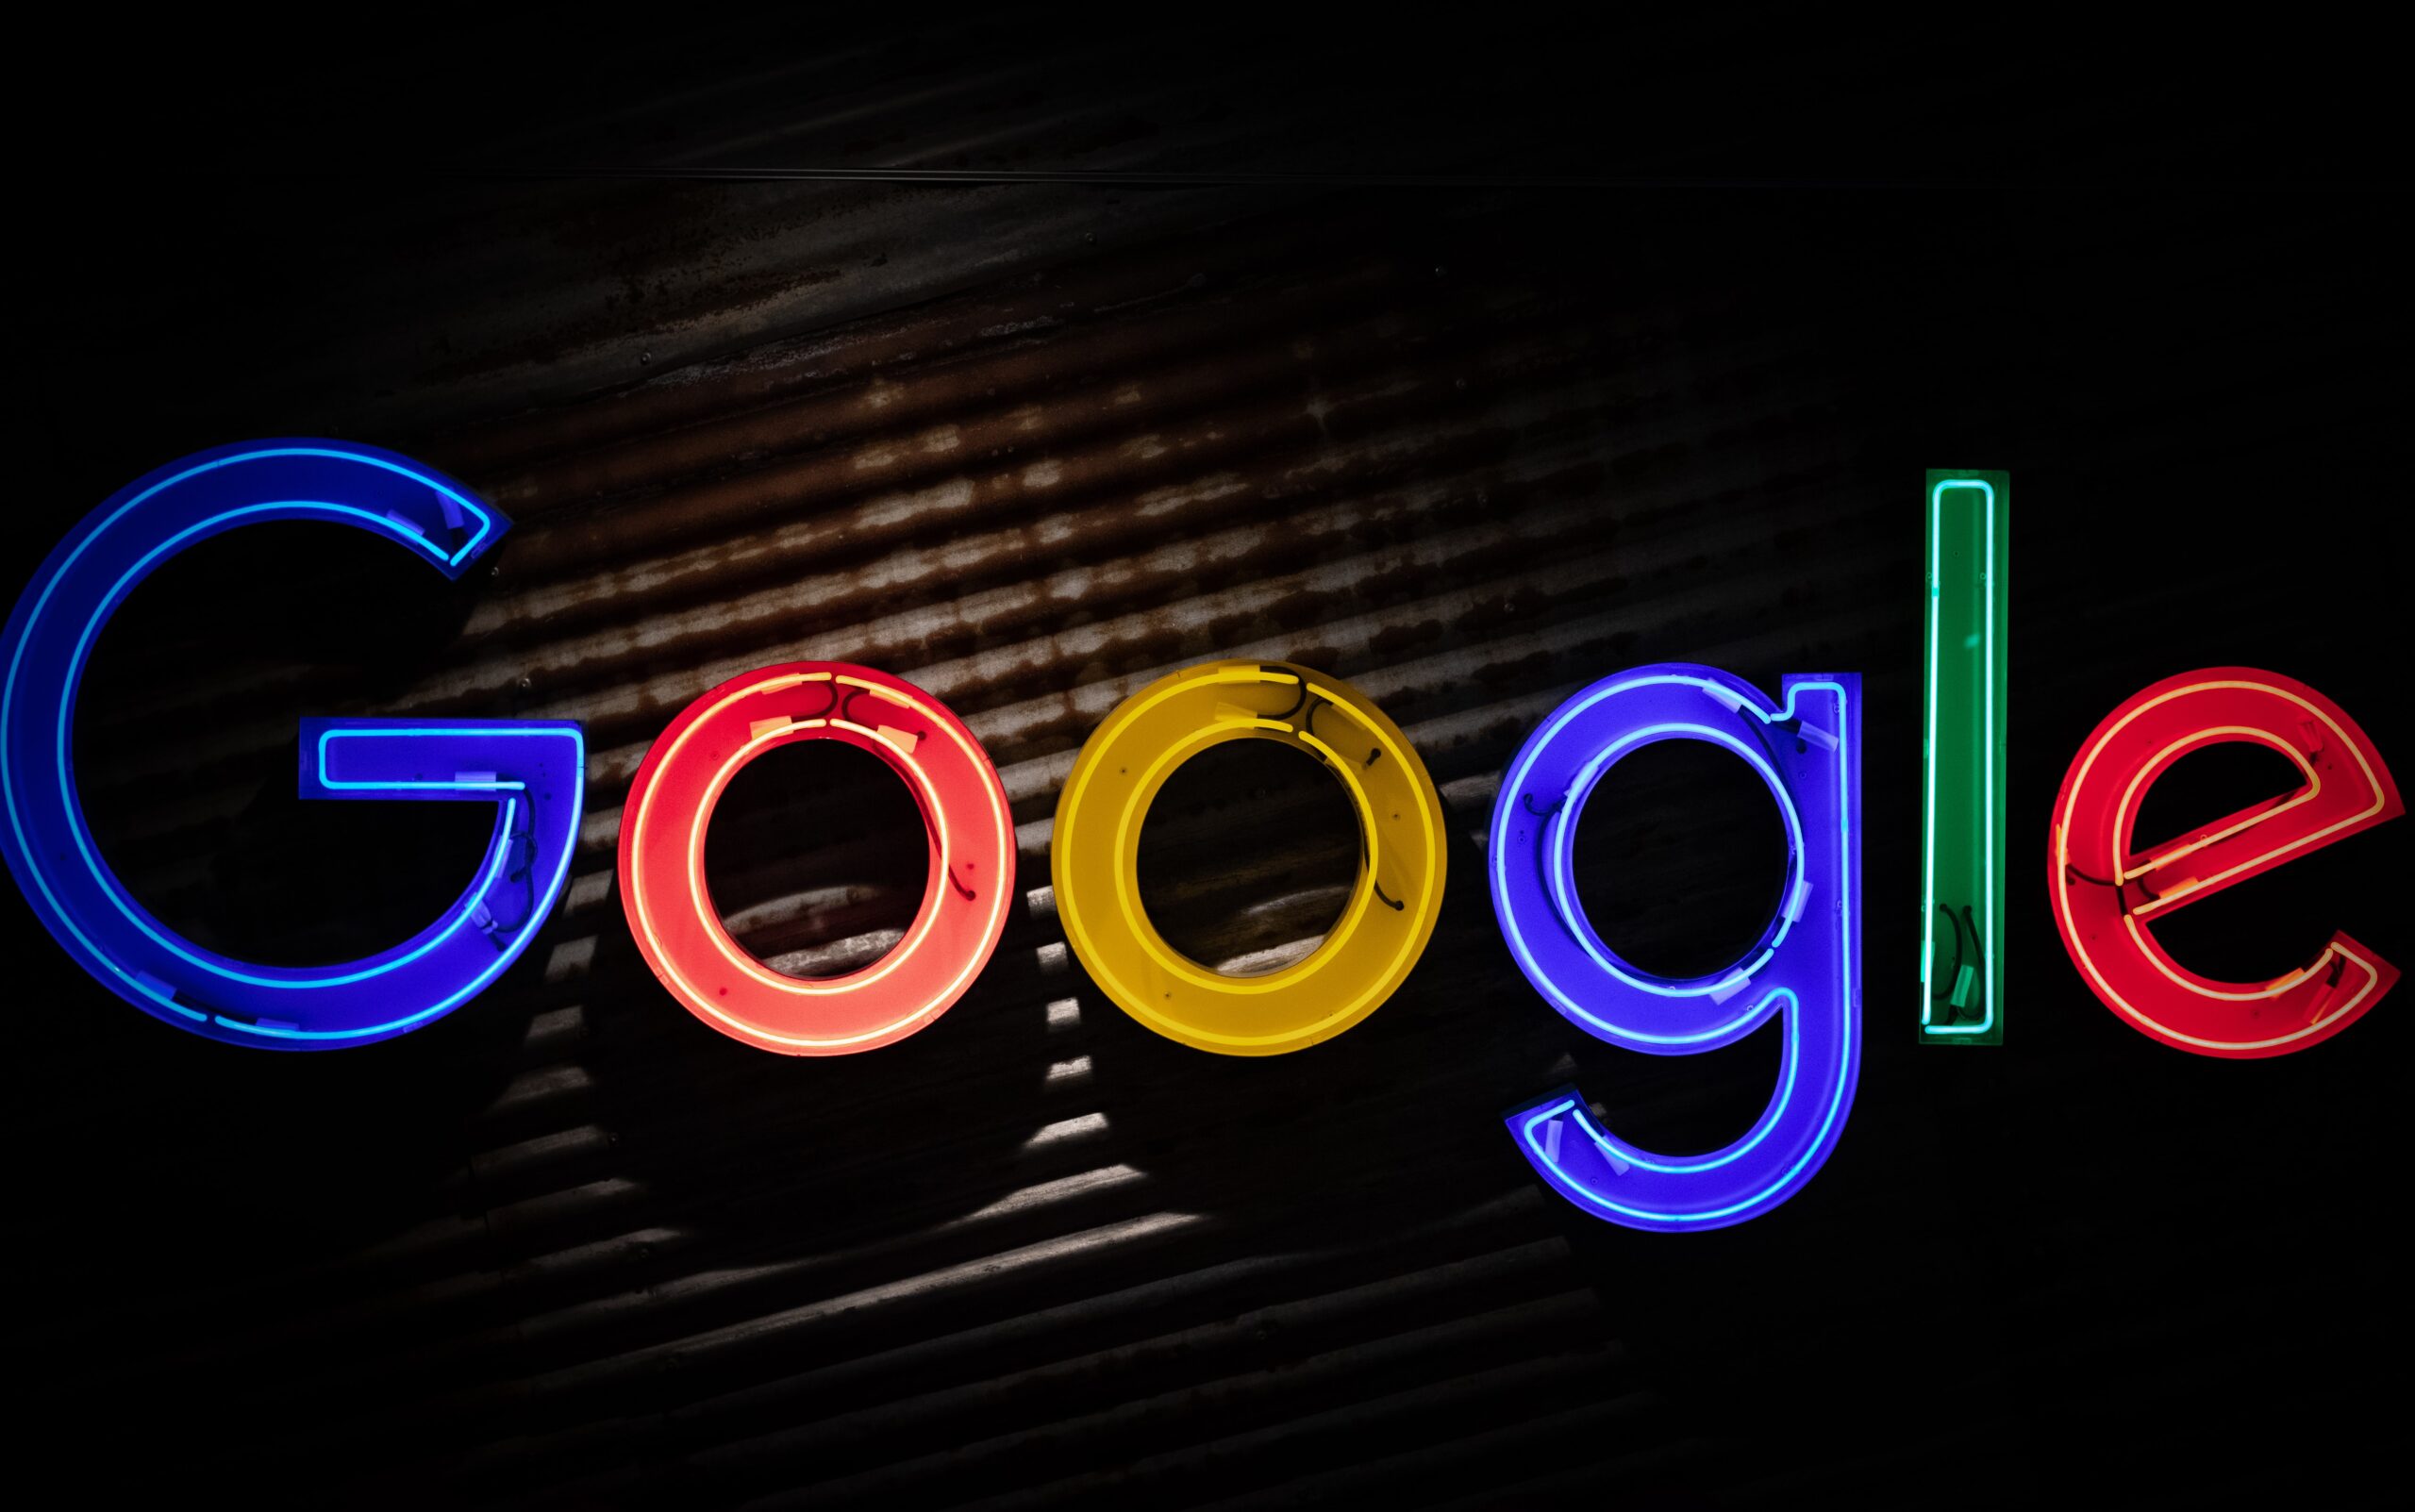 Google sign with blue, red, yellow and green letters